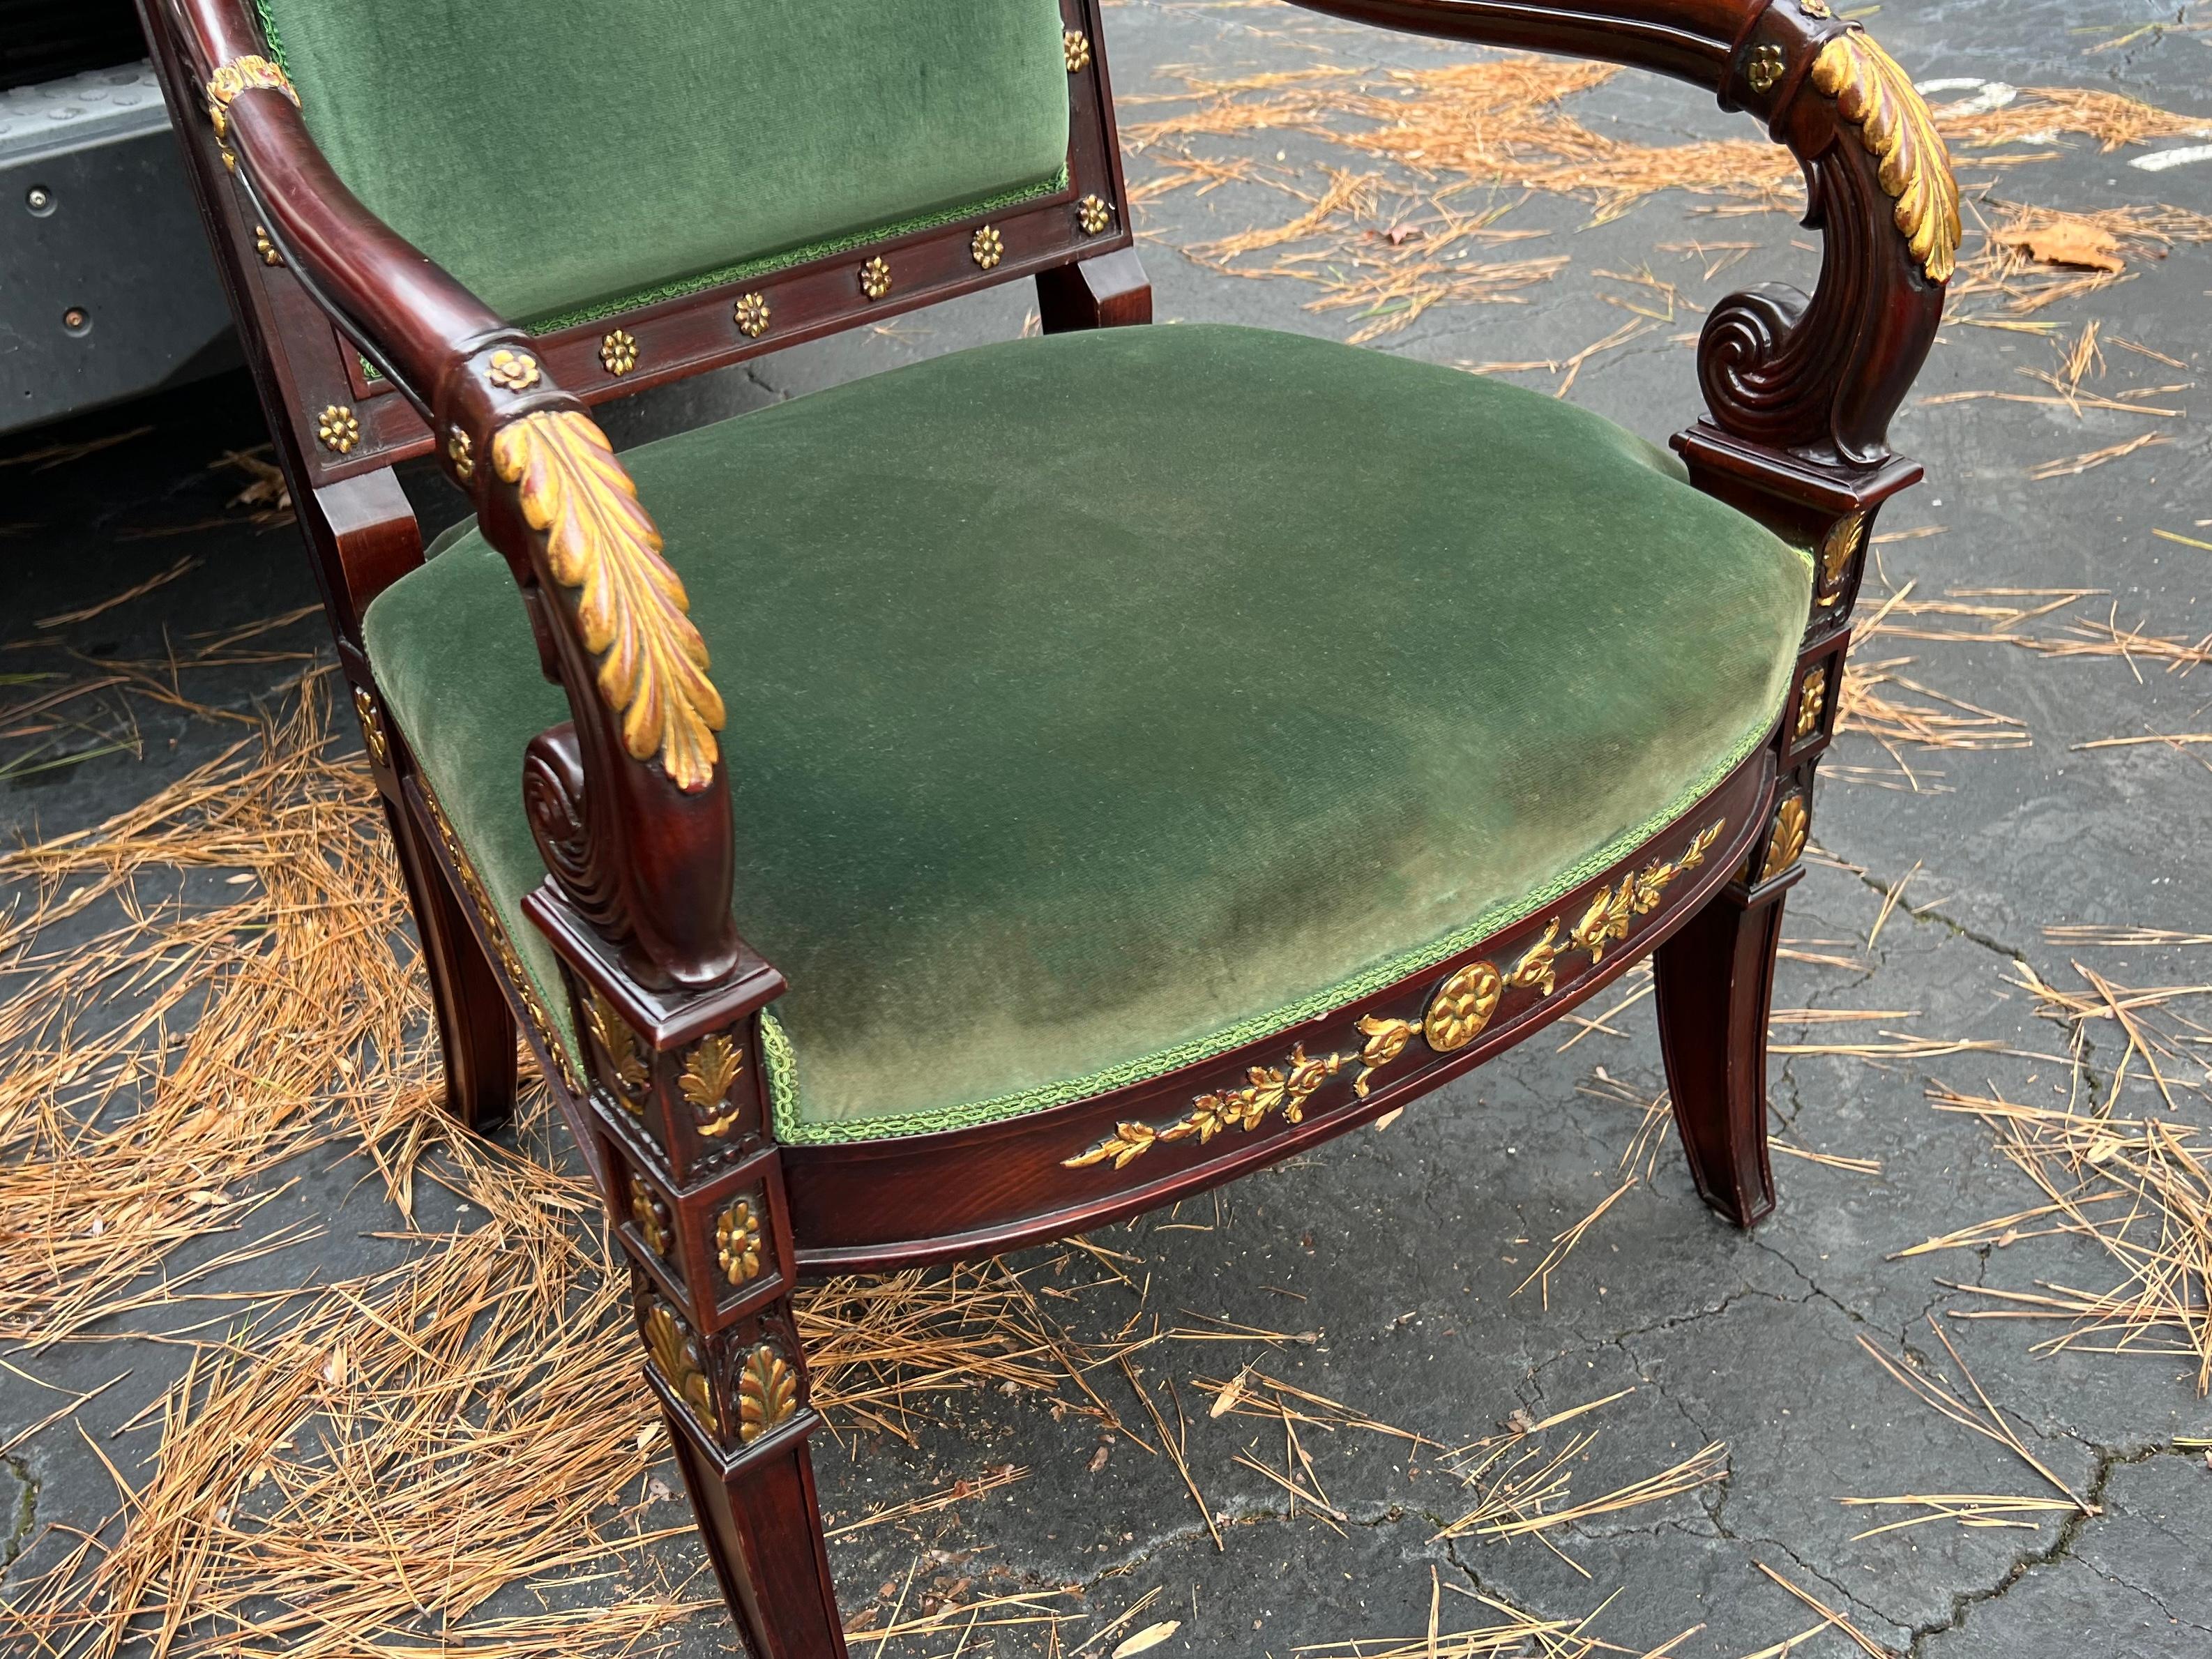 20th-C. Fruitwood and Giltwood Italian Bergere Chairs in Green Velvet, Pair For Sale 1